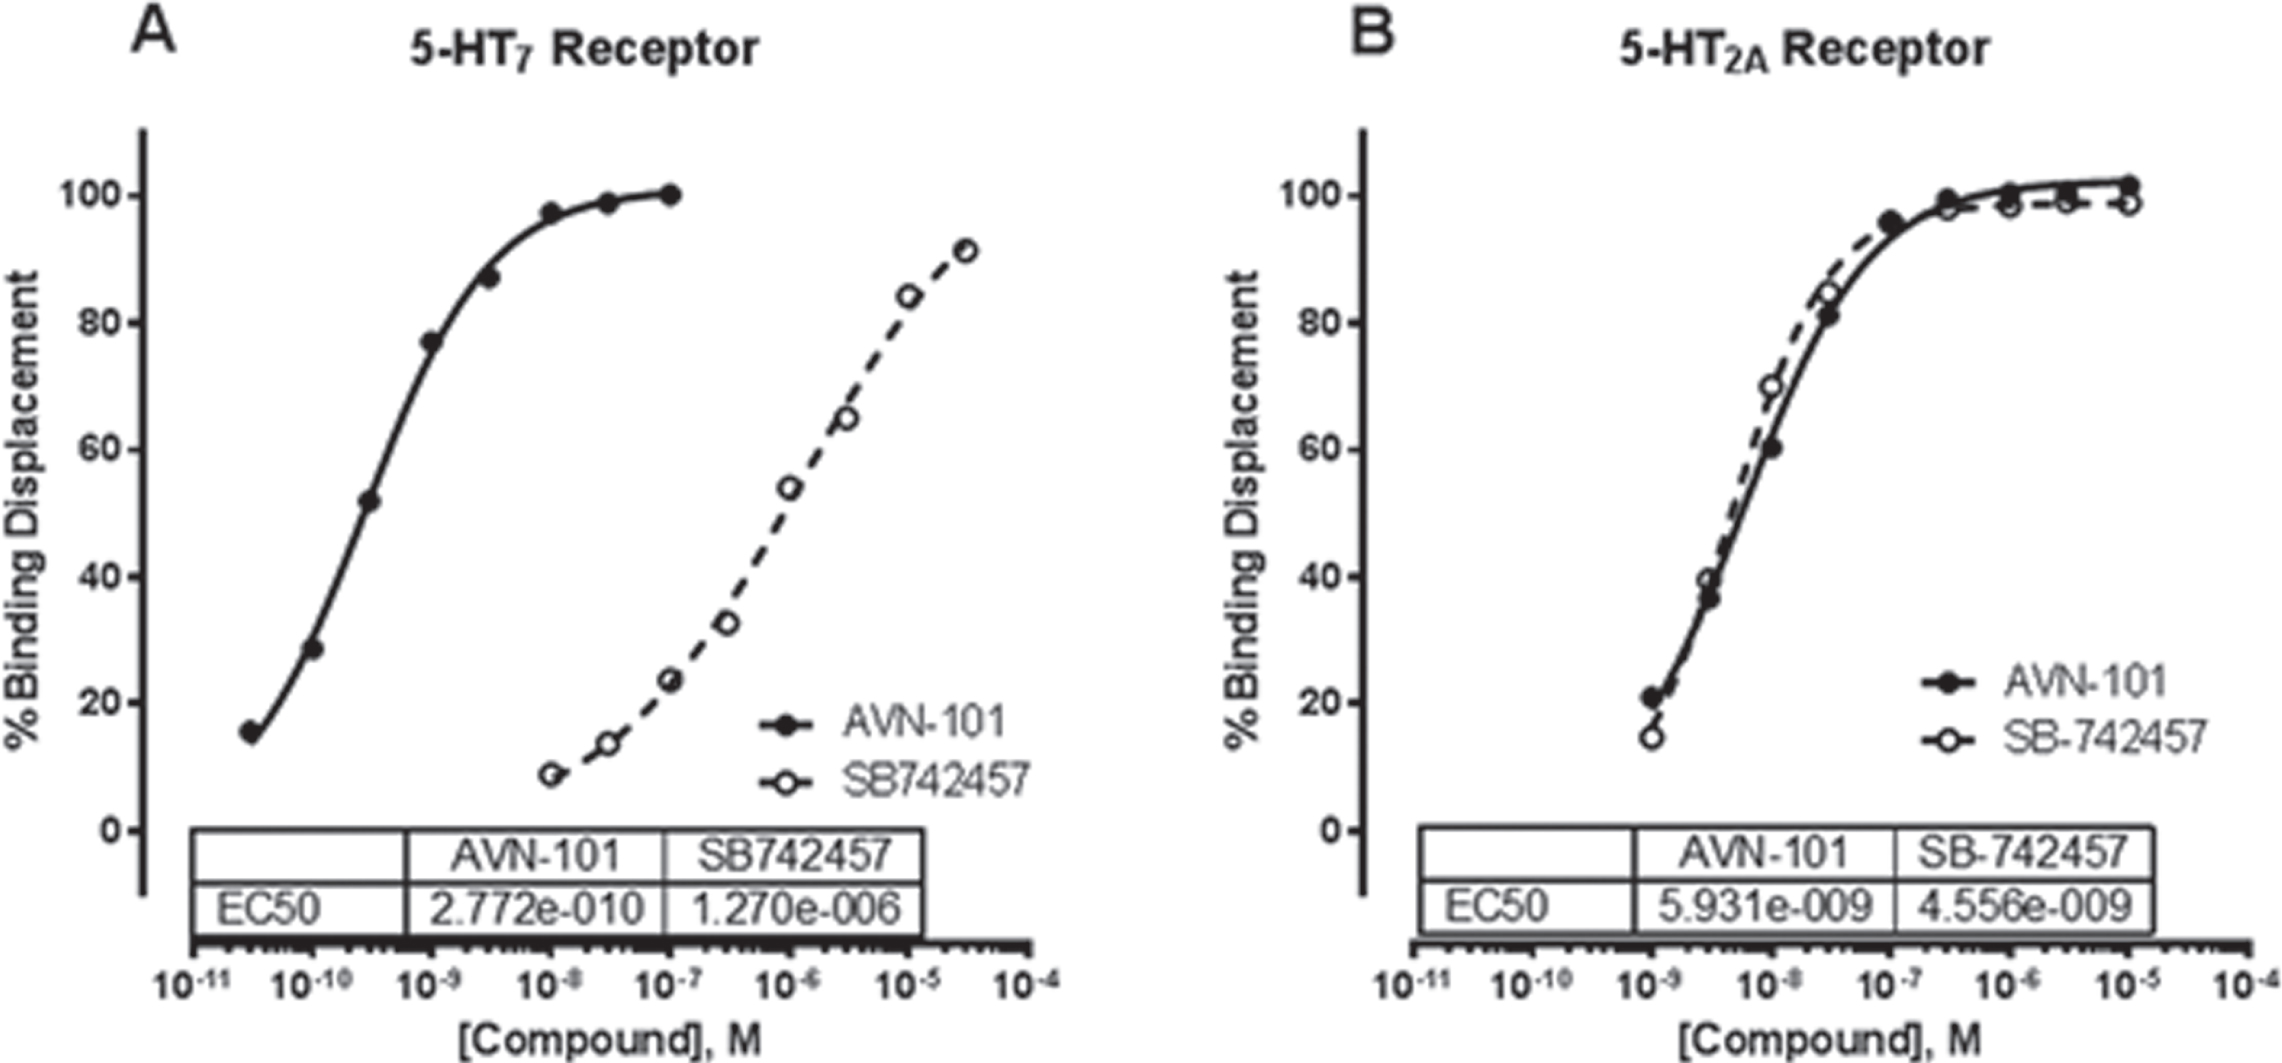 Affinities of AVN-101 and SB742457 to 5-HT7 (A) and 5-HT2A (B) receptors in competitive radioligand binding assay. Radio-labeled 5.5 nM [3H] lysergic acid diethylamide was used for 5-HT7 receptor and 0.5 nM [3H] ketanserin was used for 5-HT2A receptor.